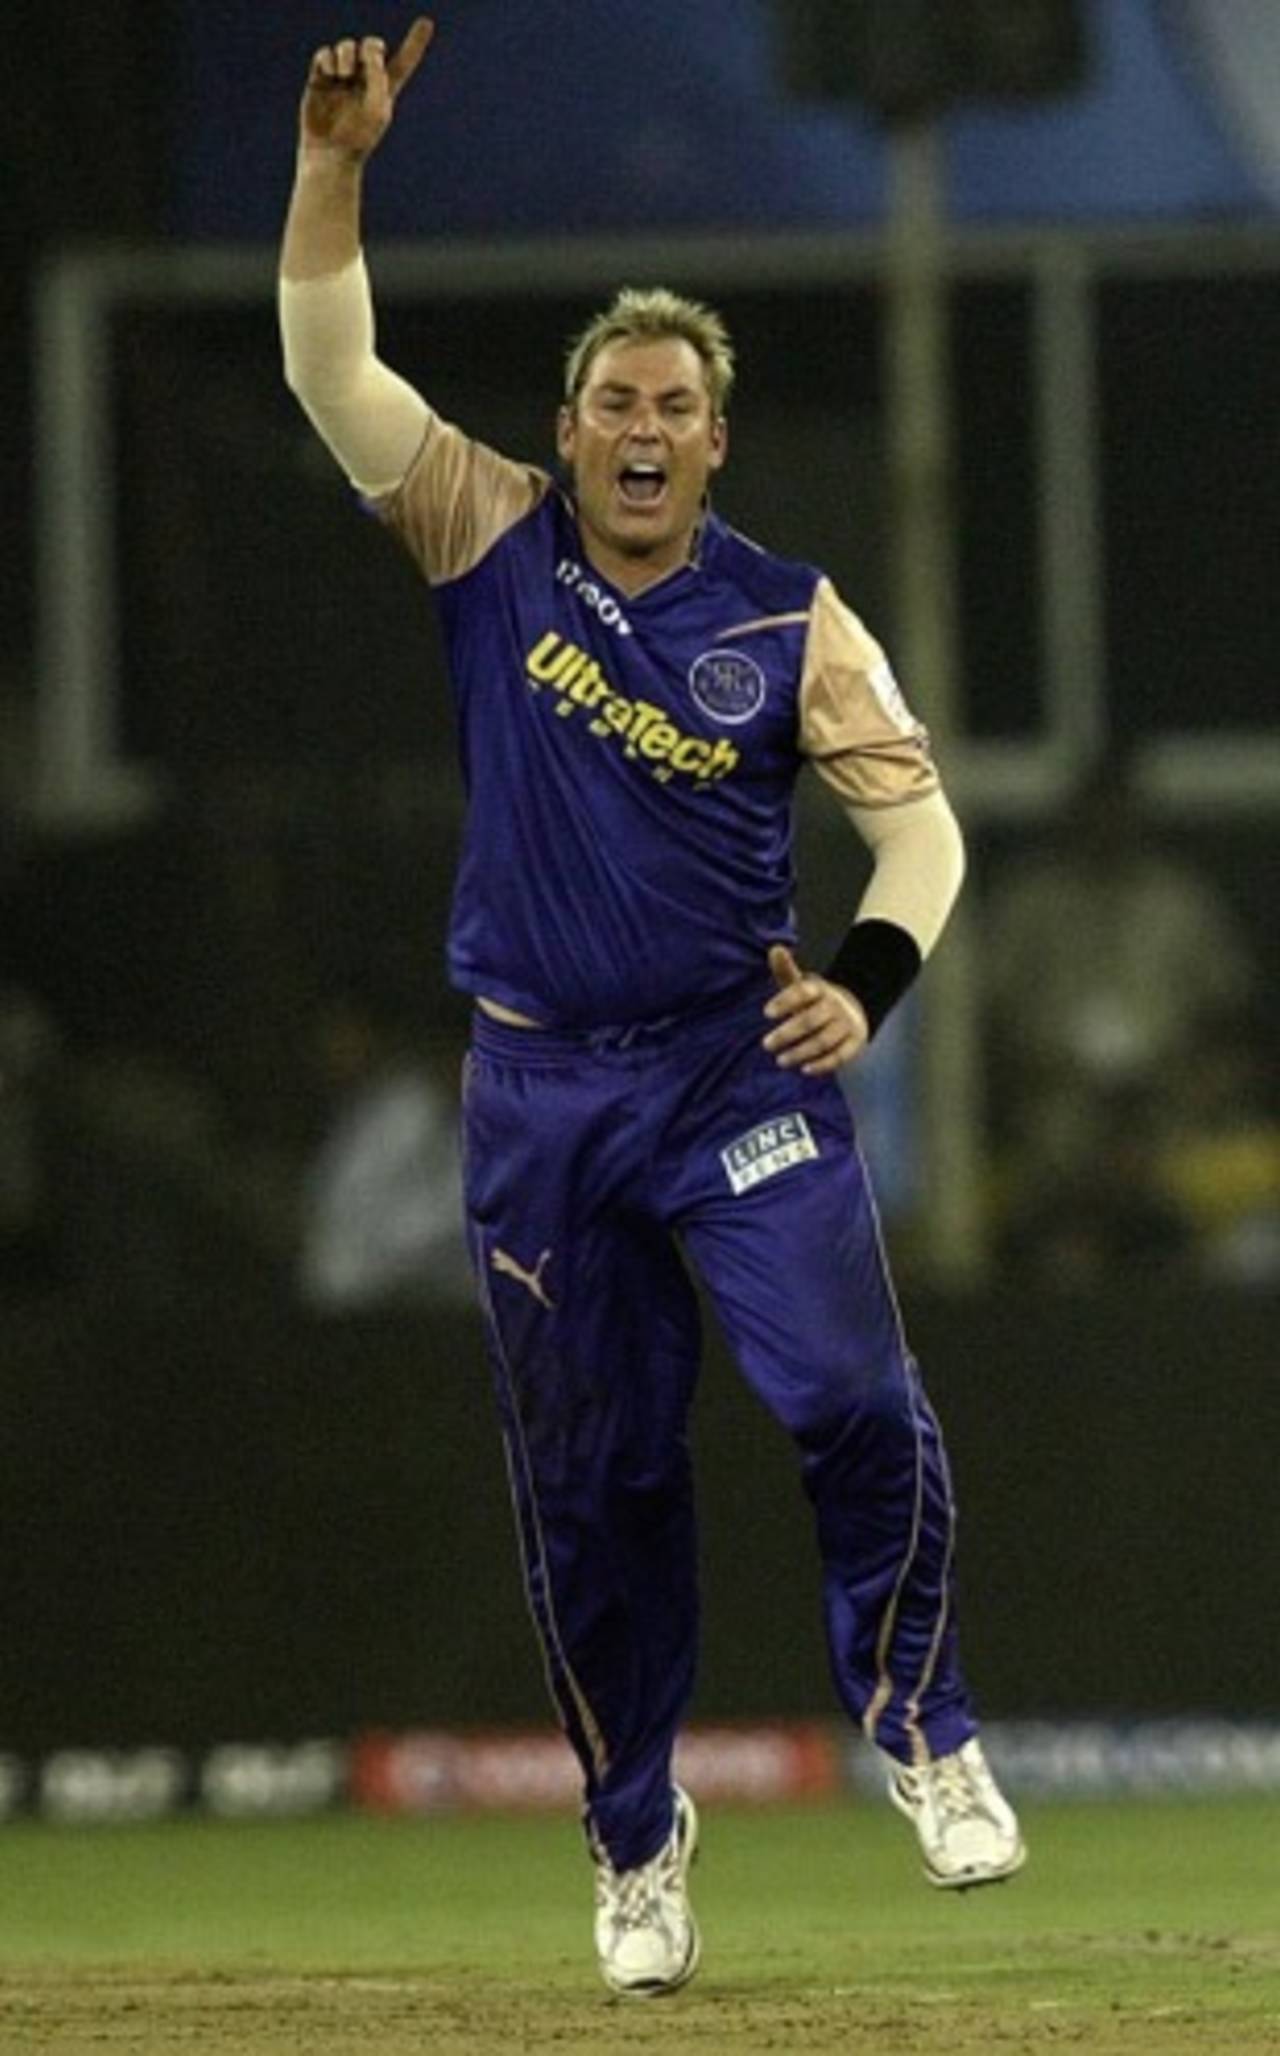 Shane Warne plays a man's game with a child's fervour. KP and Symonds could learn from him&nbsp;&nbsp;&bull;&nbsp;&nbsp;Indian Premier League